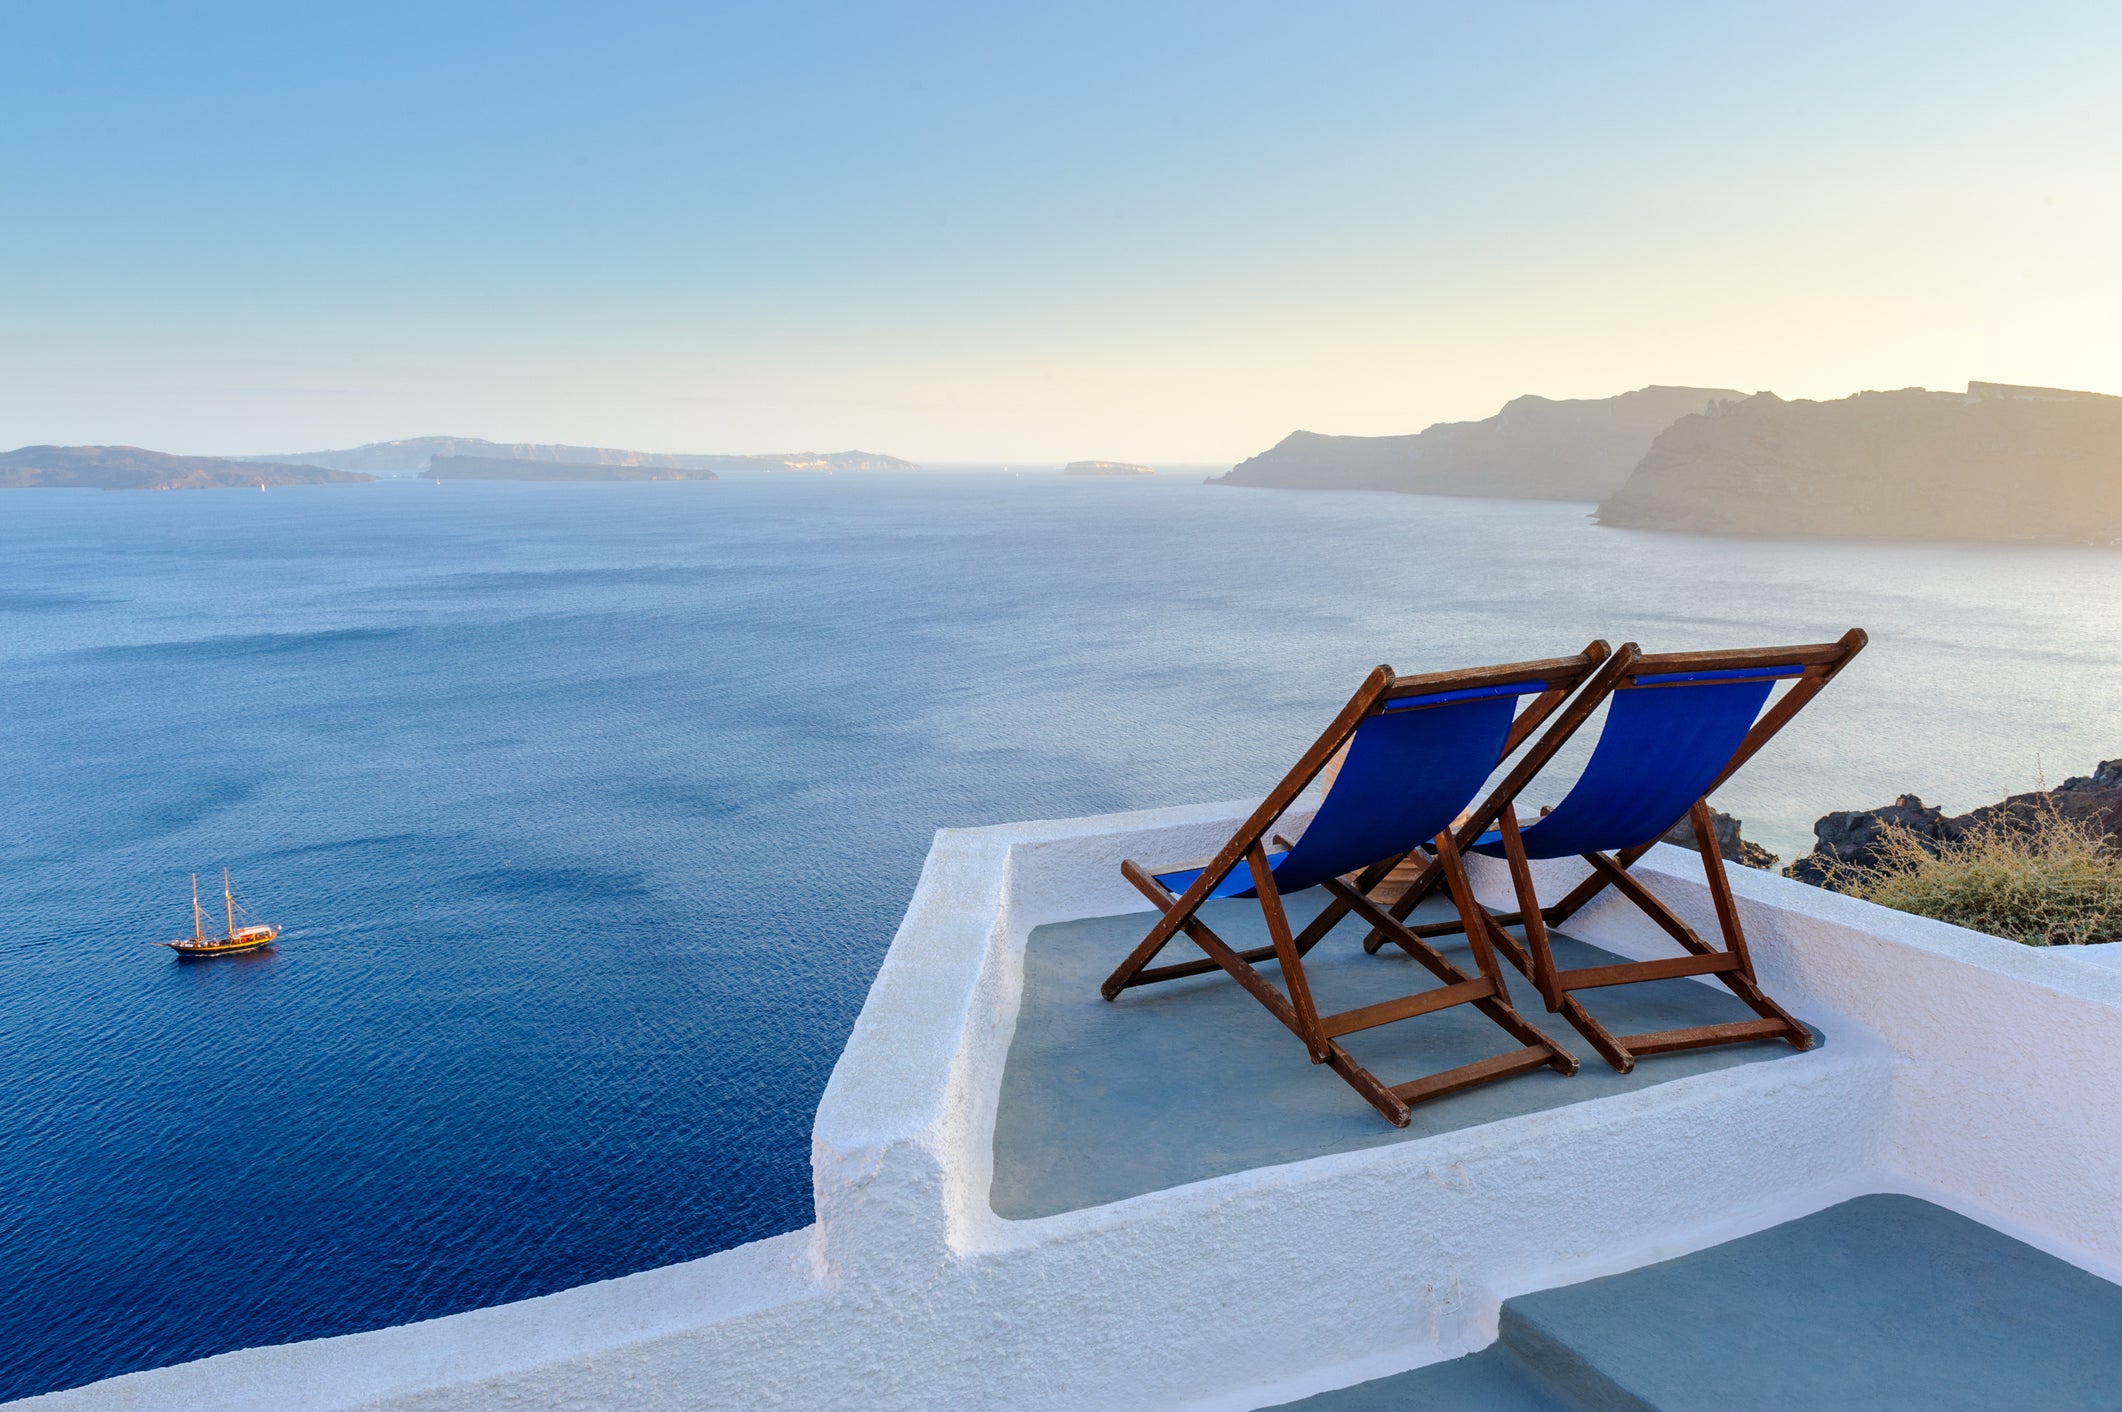 Take in Santorini’s spectacular sunsets with your significant other